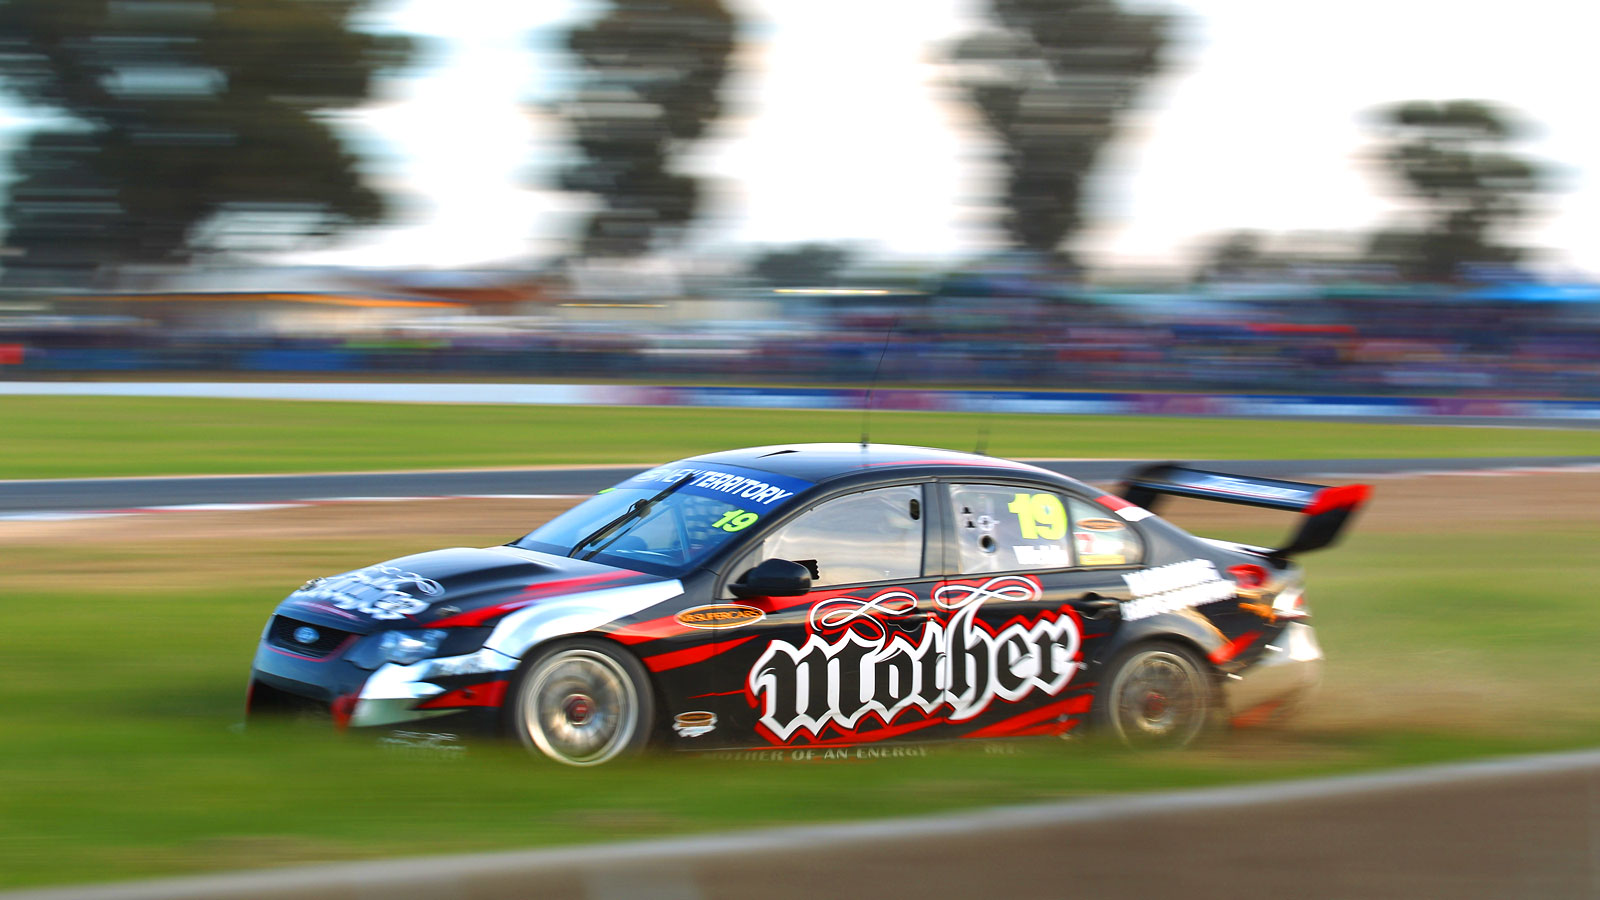 v8 supercars Picture